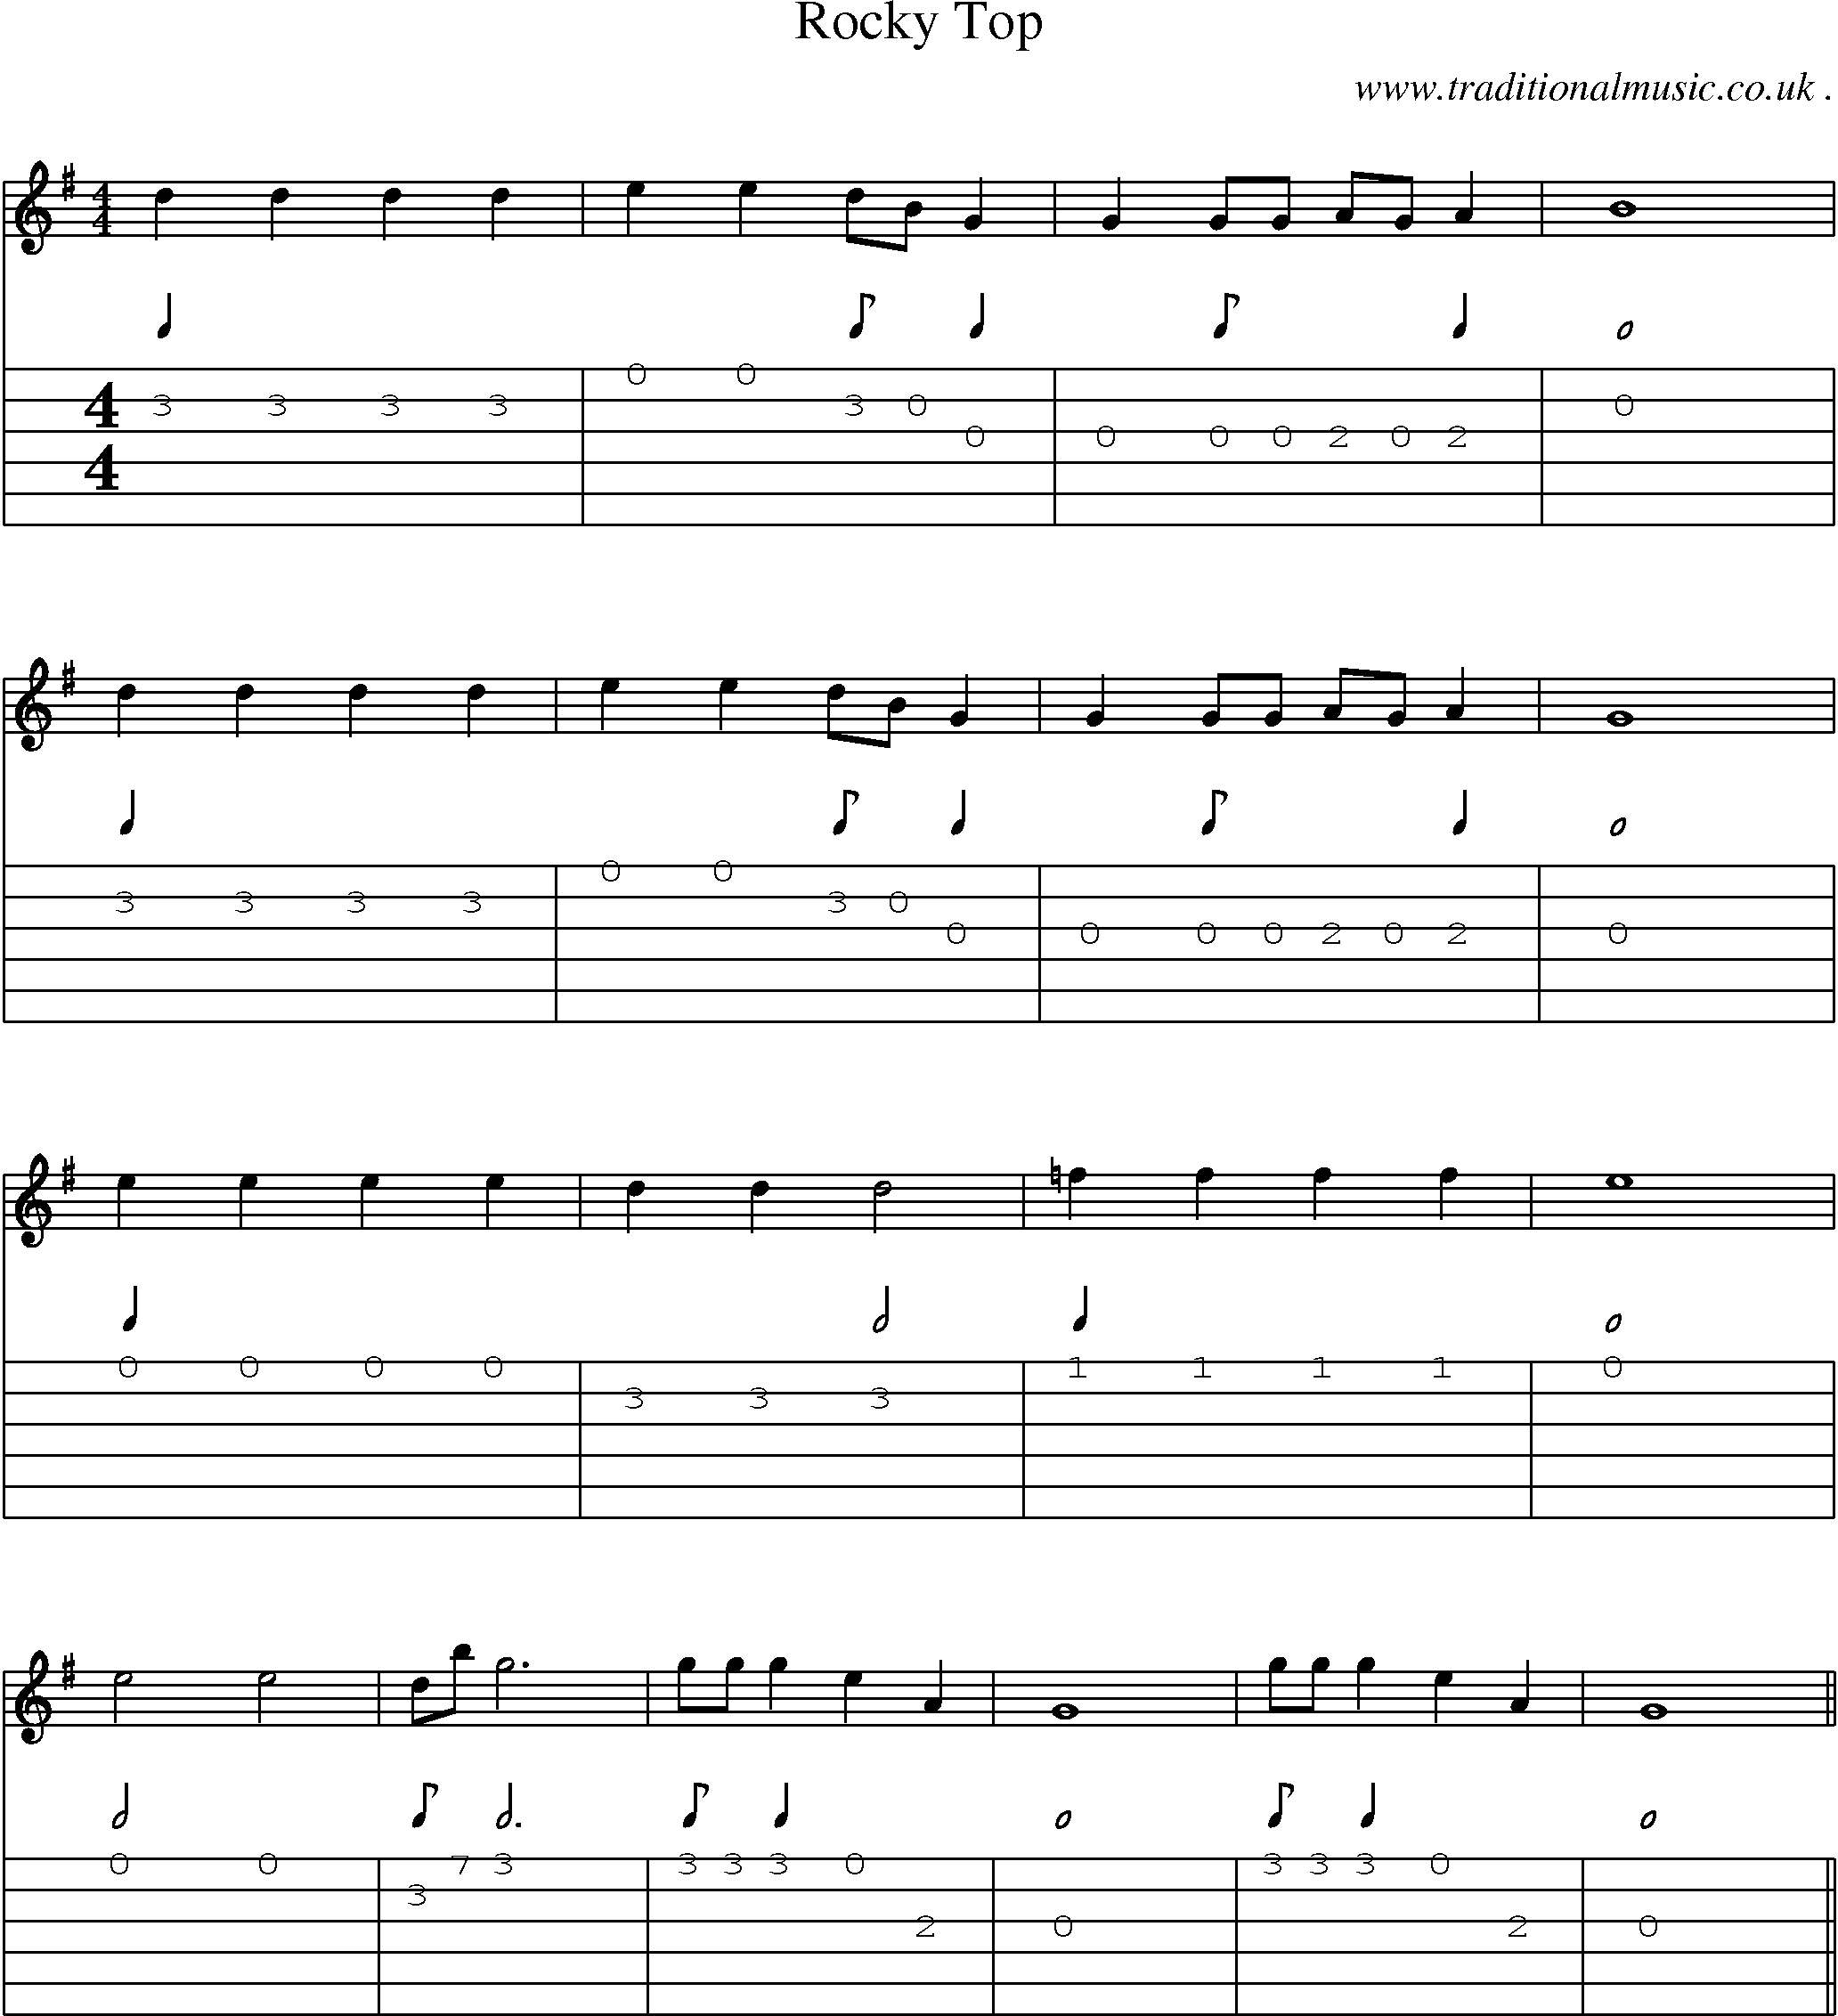 Music Score and Guitar Tabs for Rocky Top